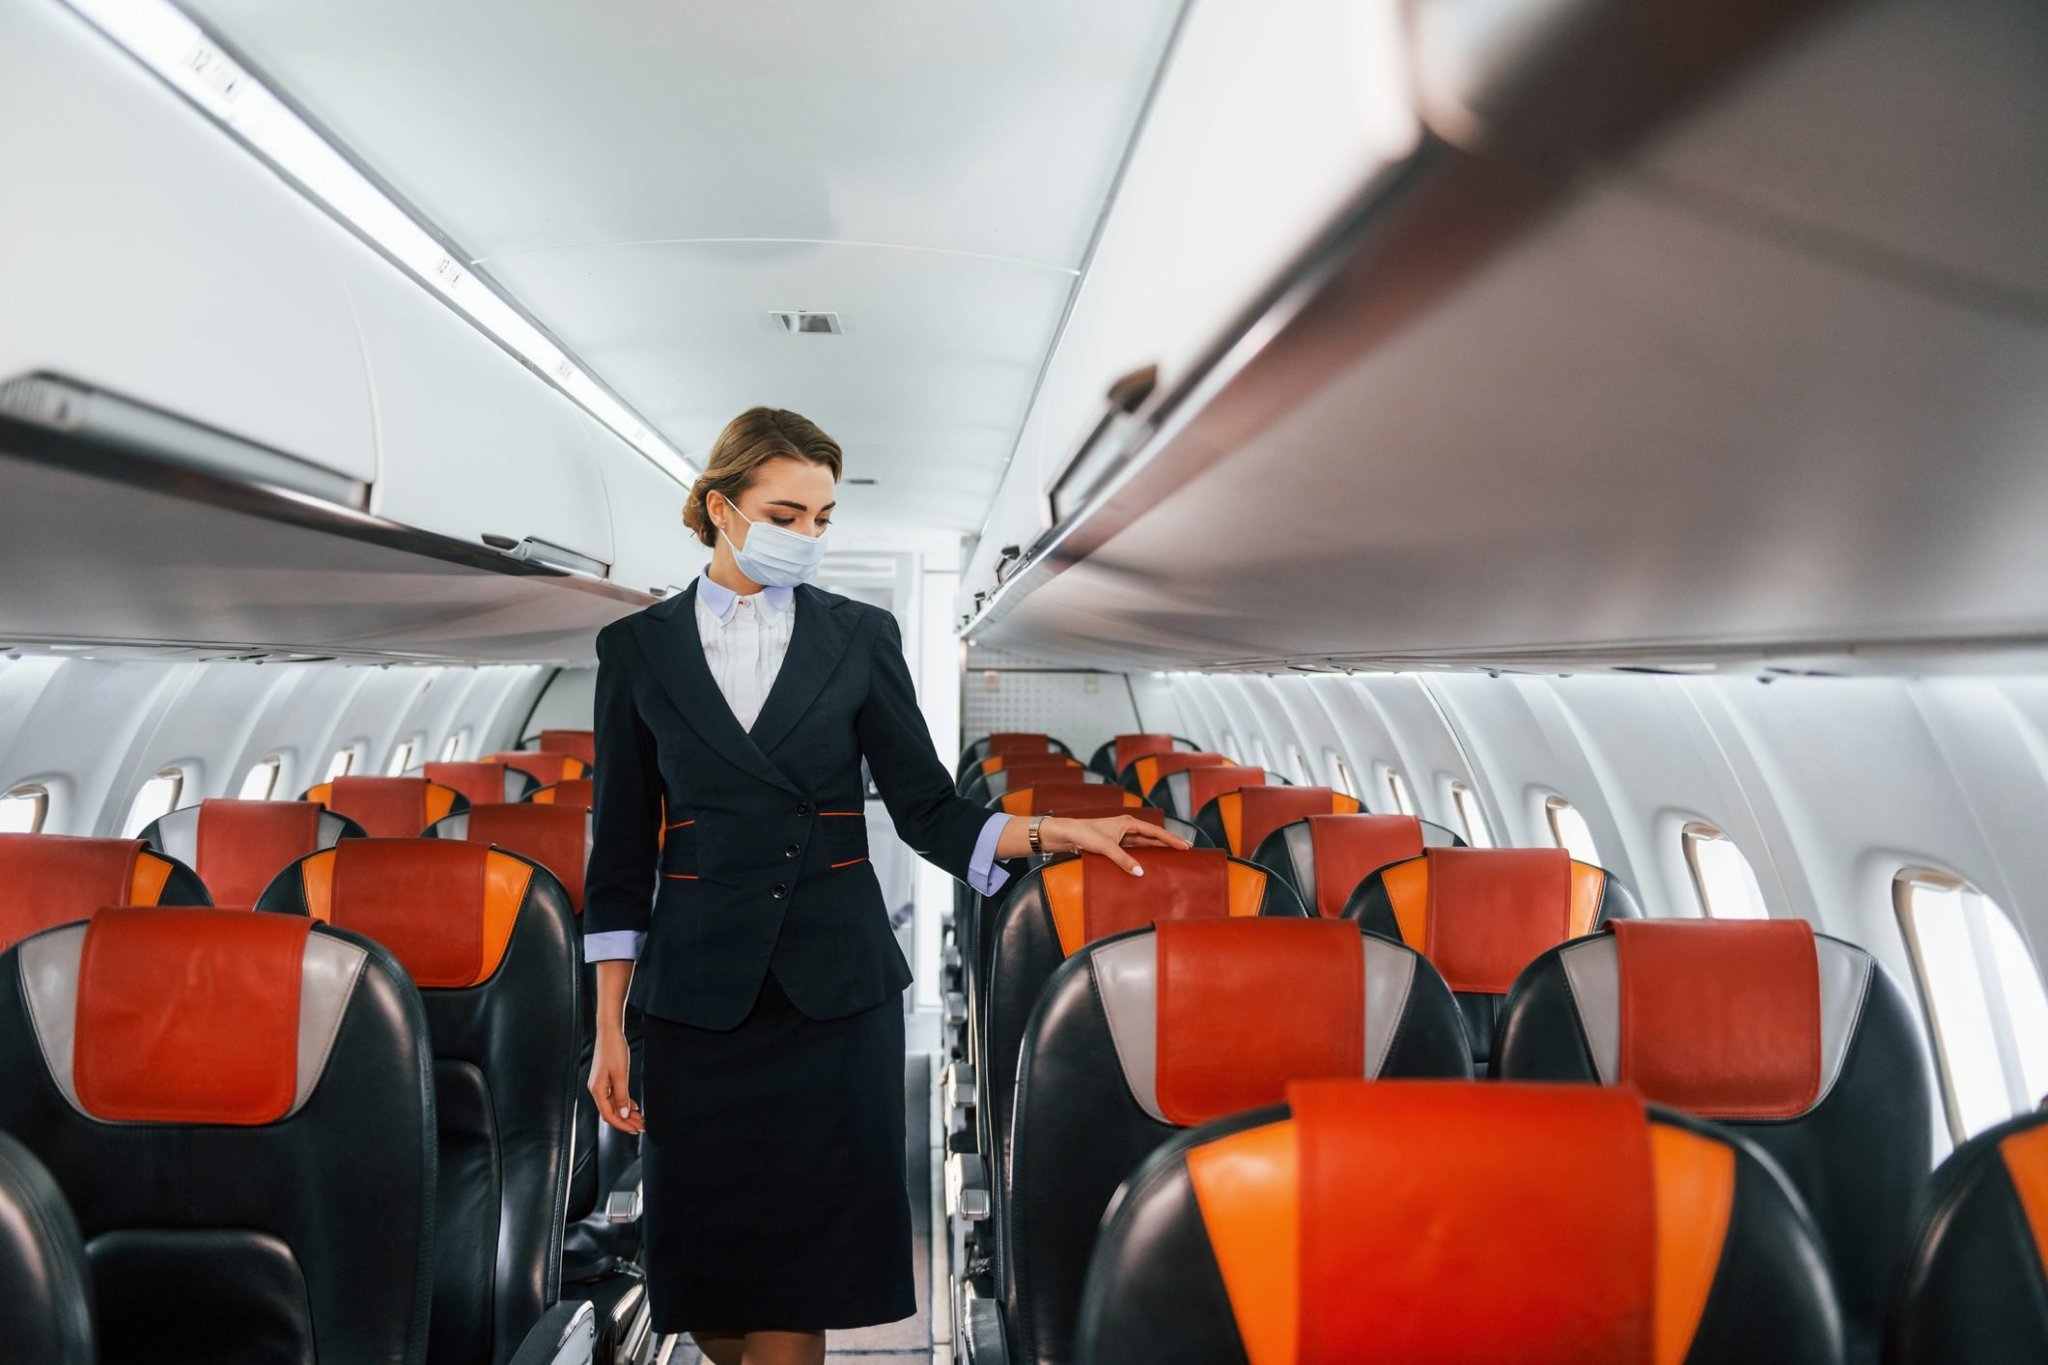 This Is What a Flight Attendant First Notices About You